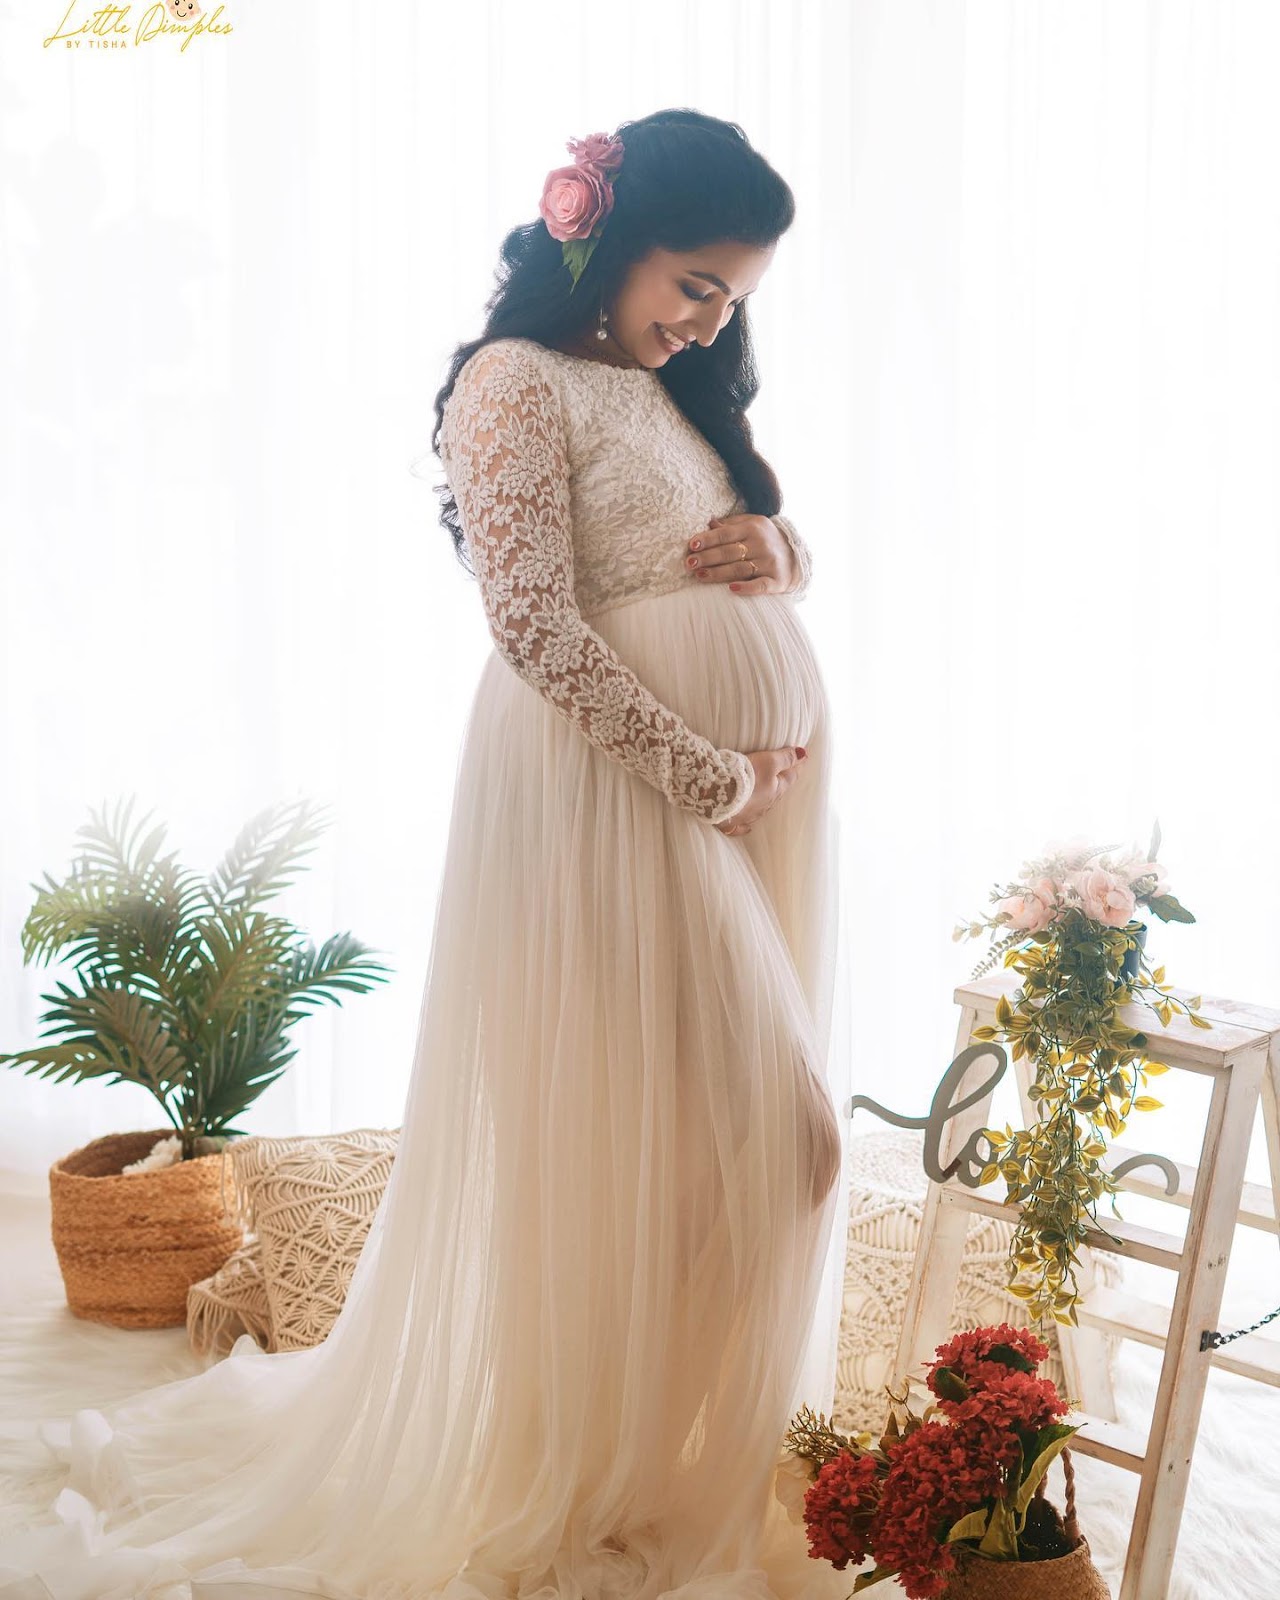 Little Dimples By Tisha is a well-known maternity photographer in Bangalore. Specialized in  Maternity Photoshoot Bangalore, pregnancy, and Baby Photoshoot Bangalore.